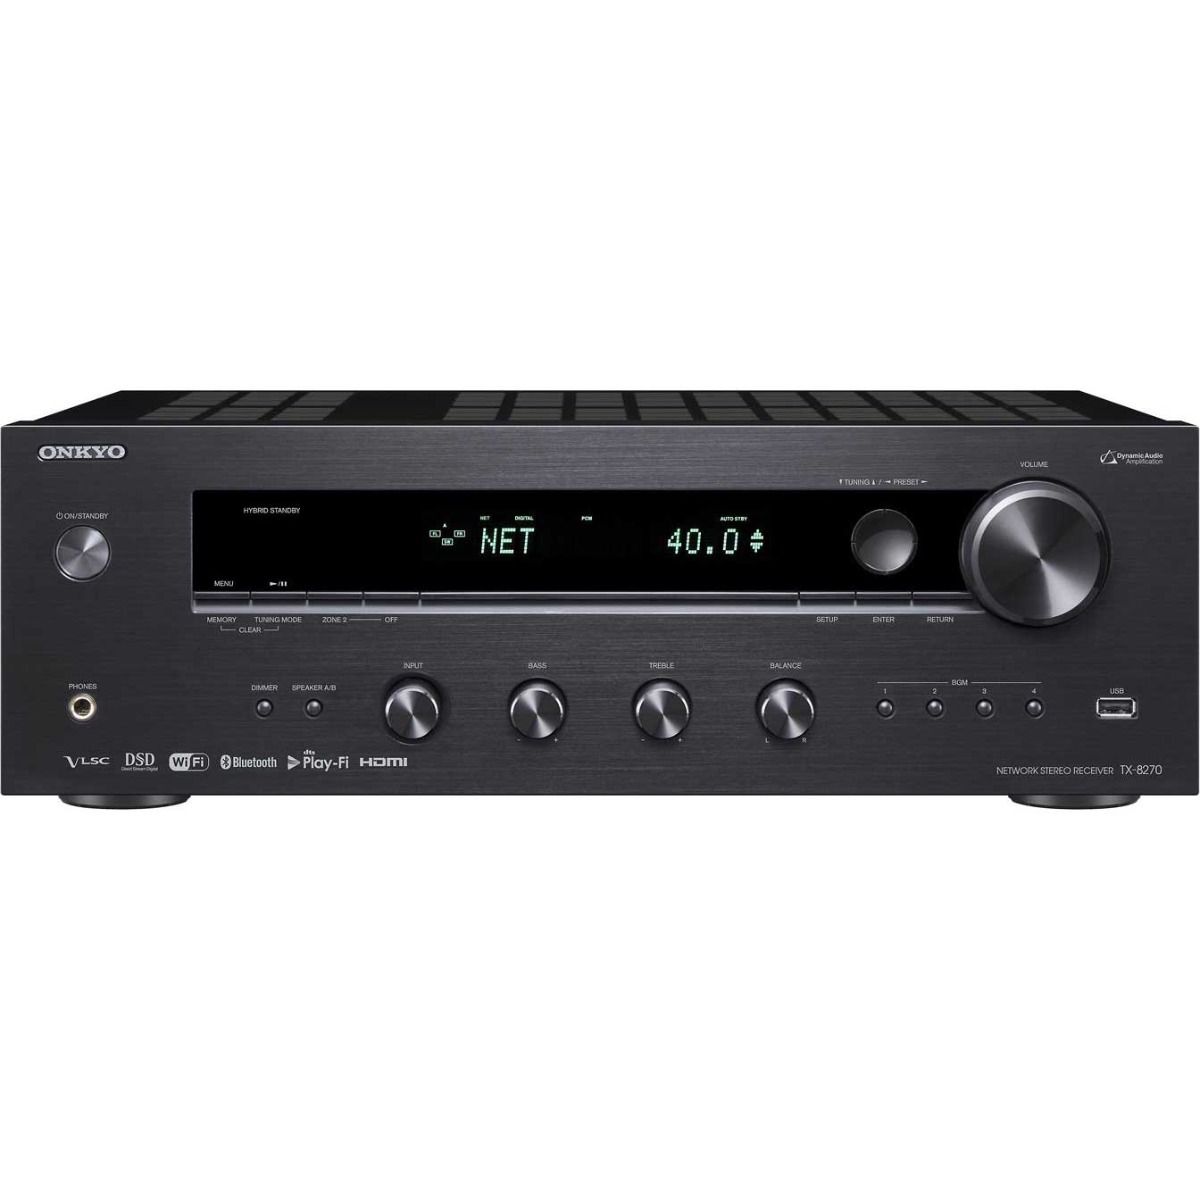 Onkyo TX-8270 Stereo Receiver front